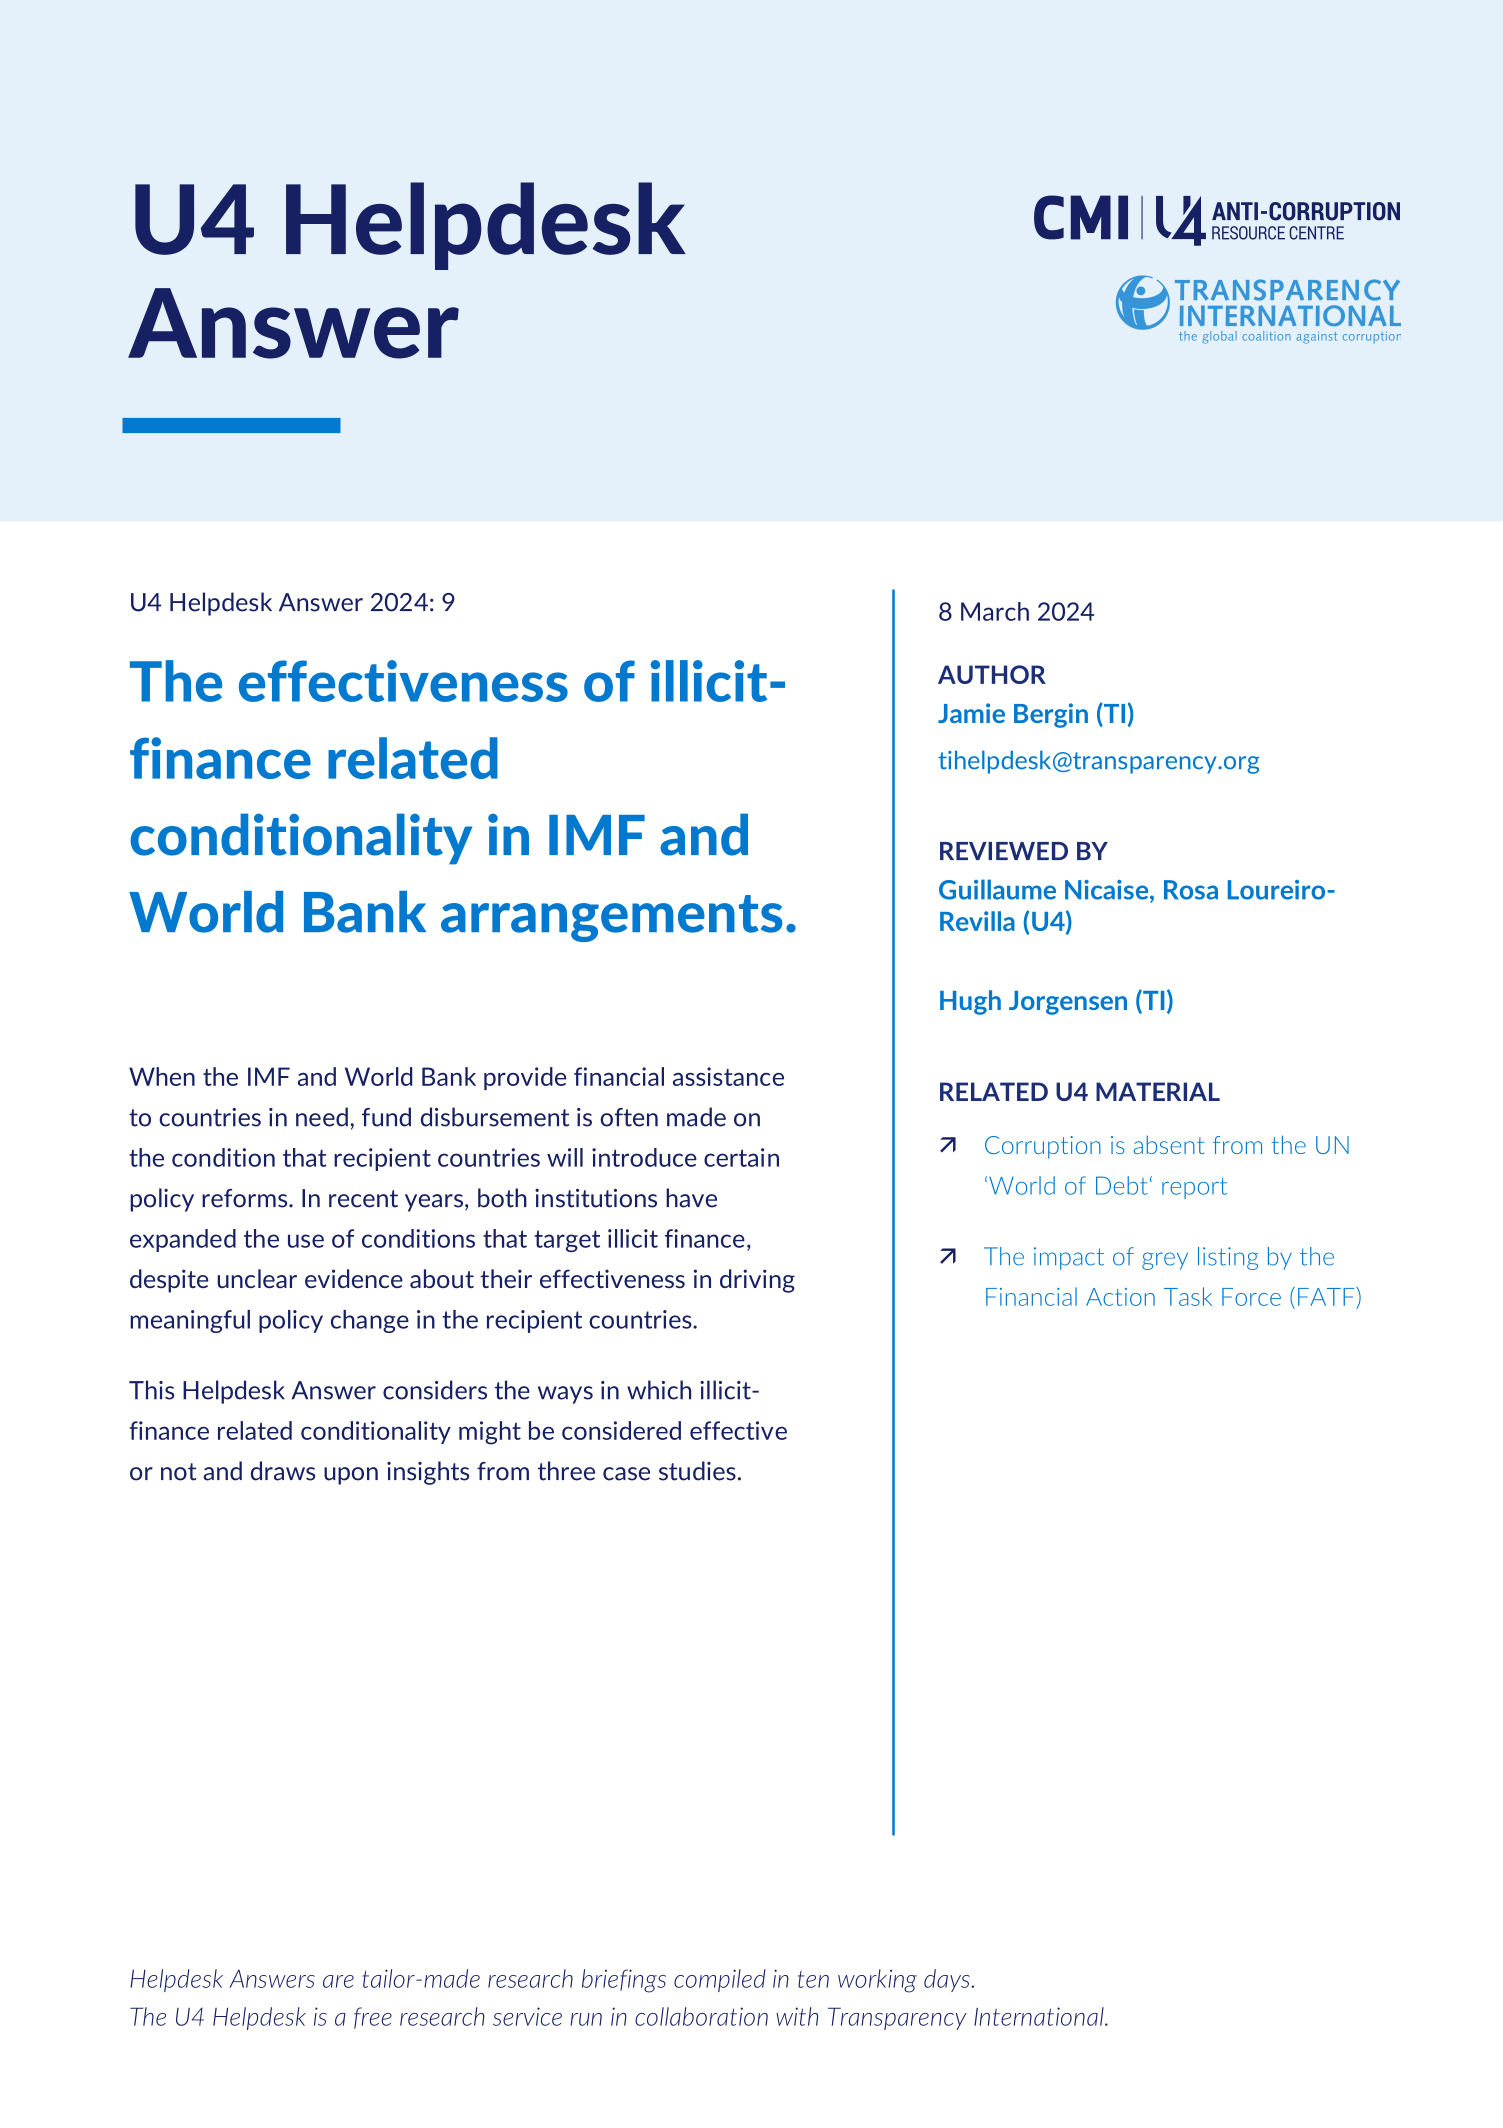 The effectiveness of illicit-finance related conditionality in IMF and World Bank arrangements